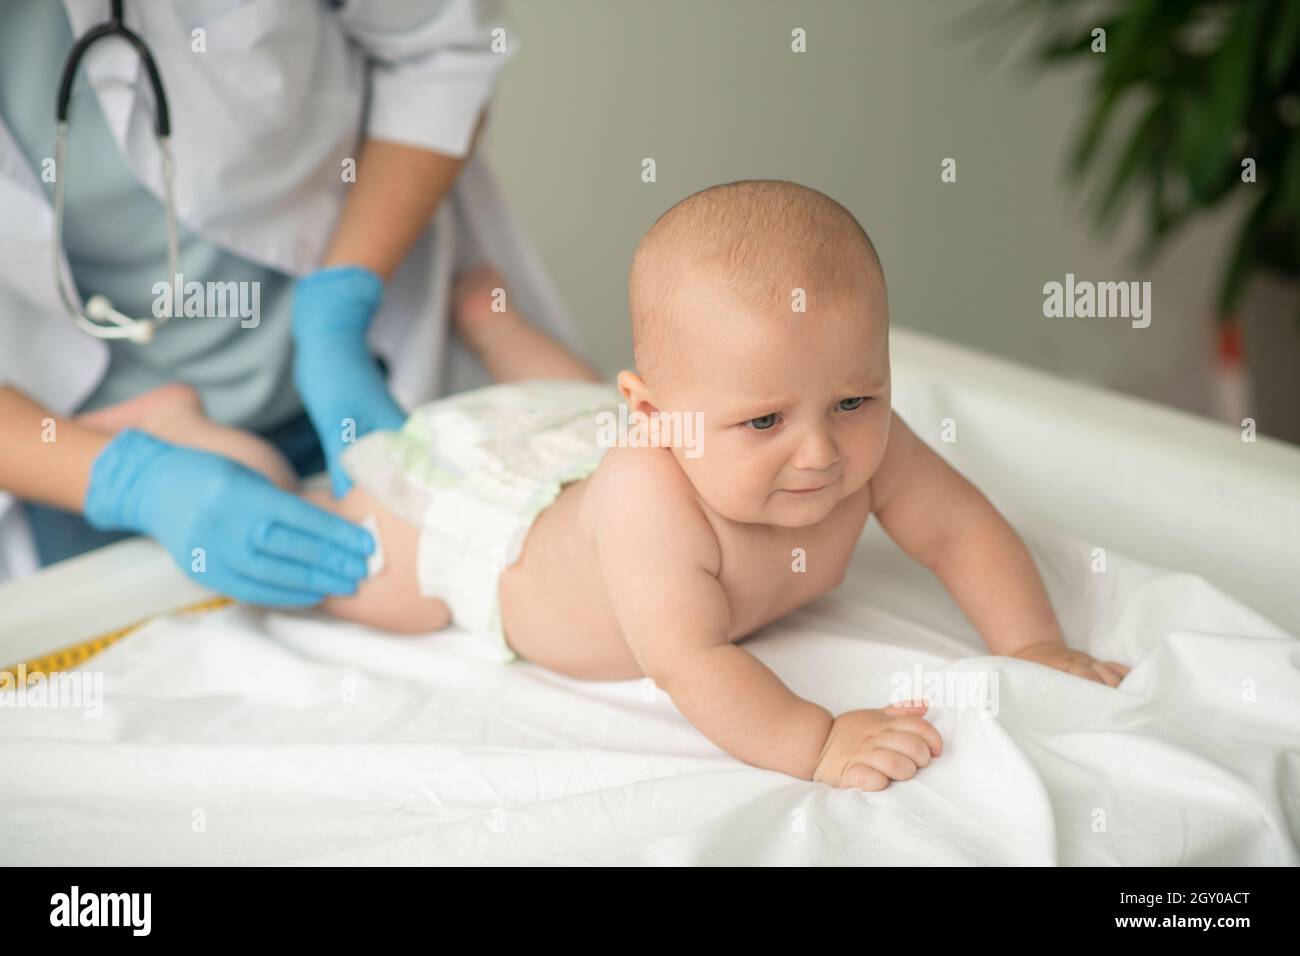 Baby being prepared for a thigh injection Stock Photo